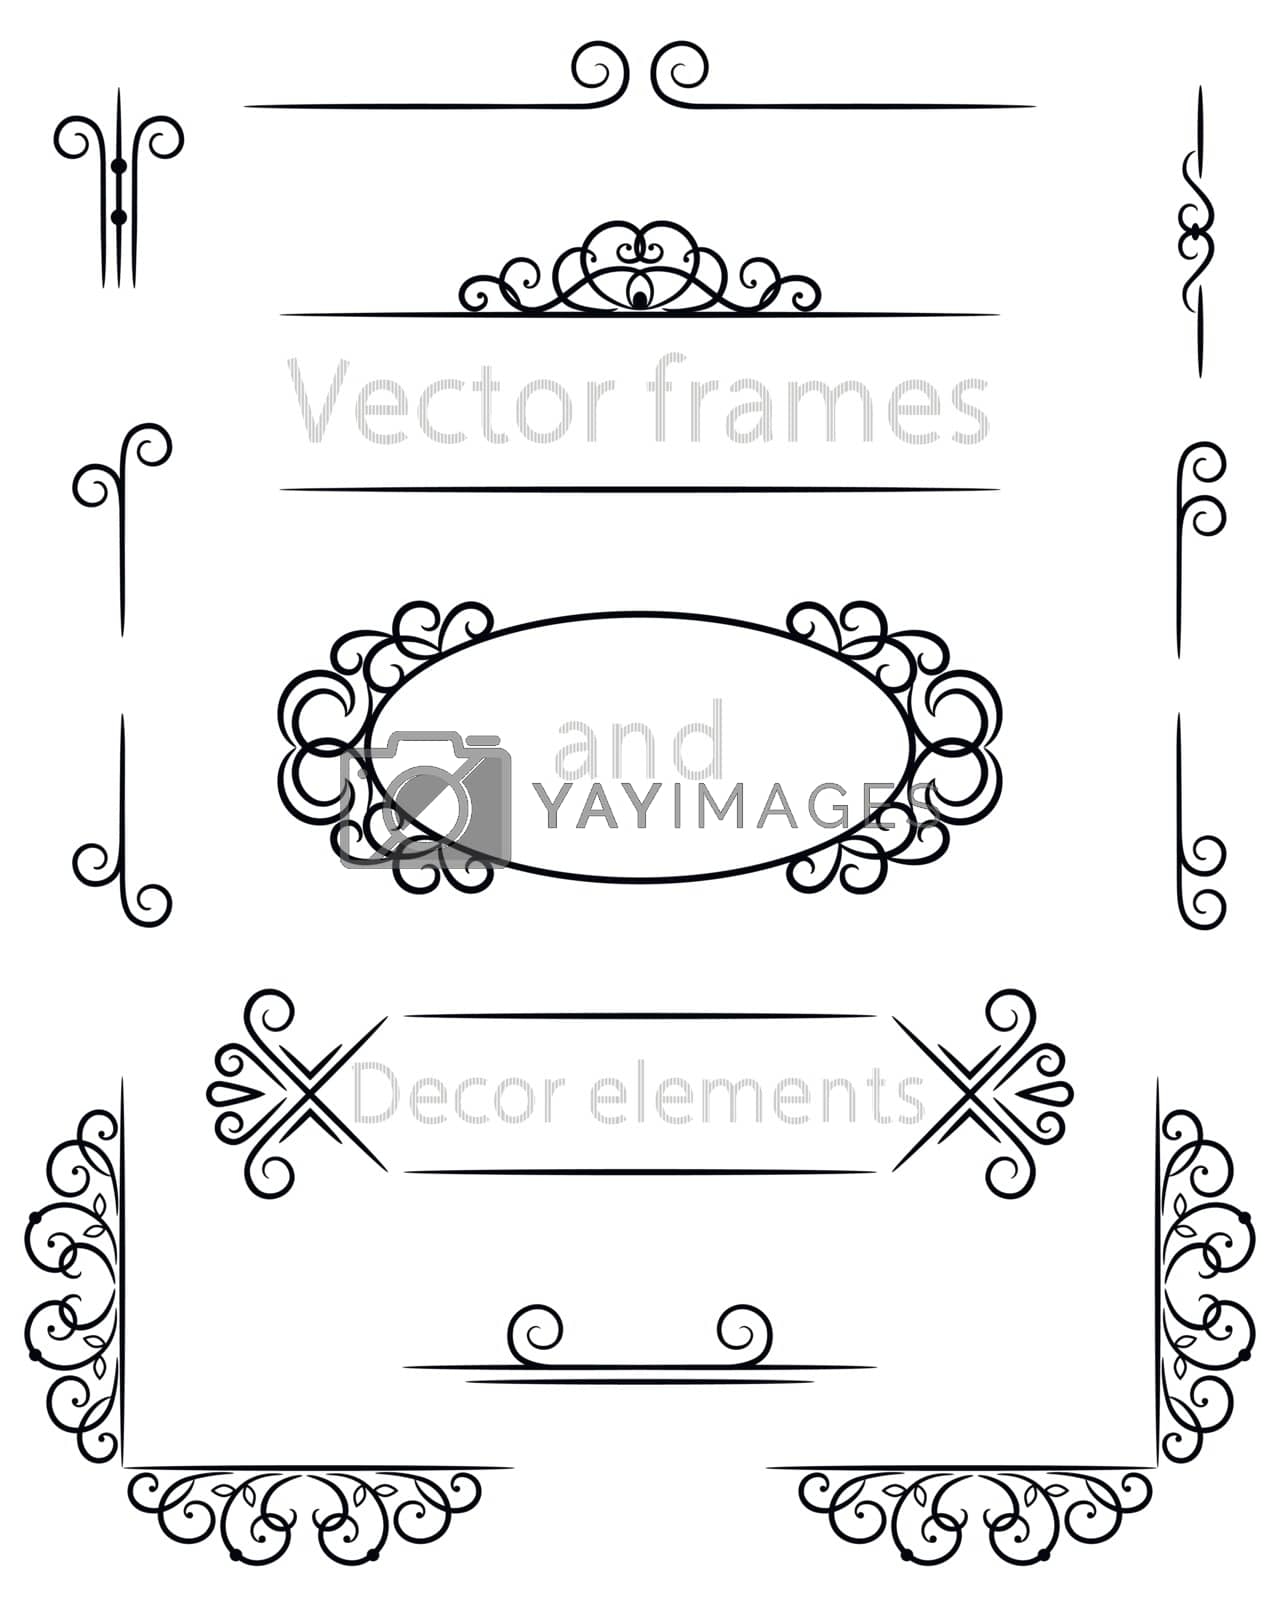 Royalty free image of vector frame and decor  by sergeevana